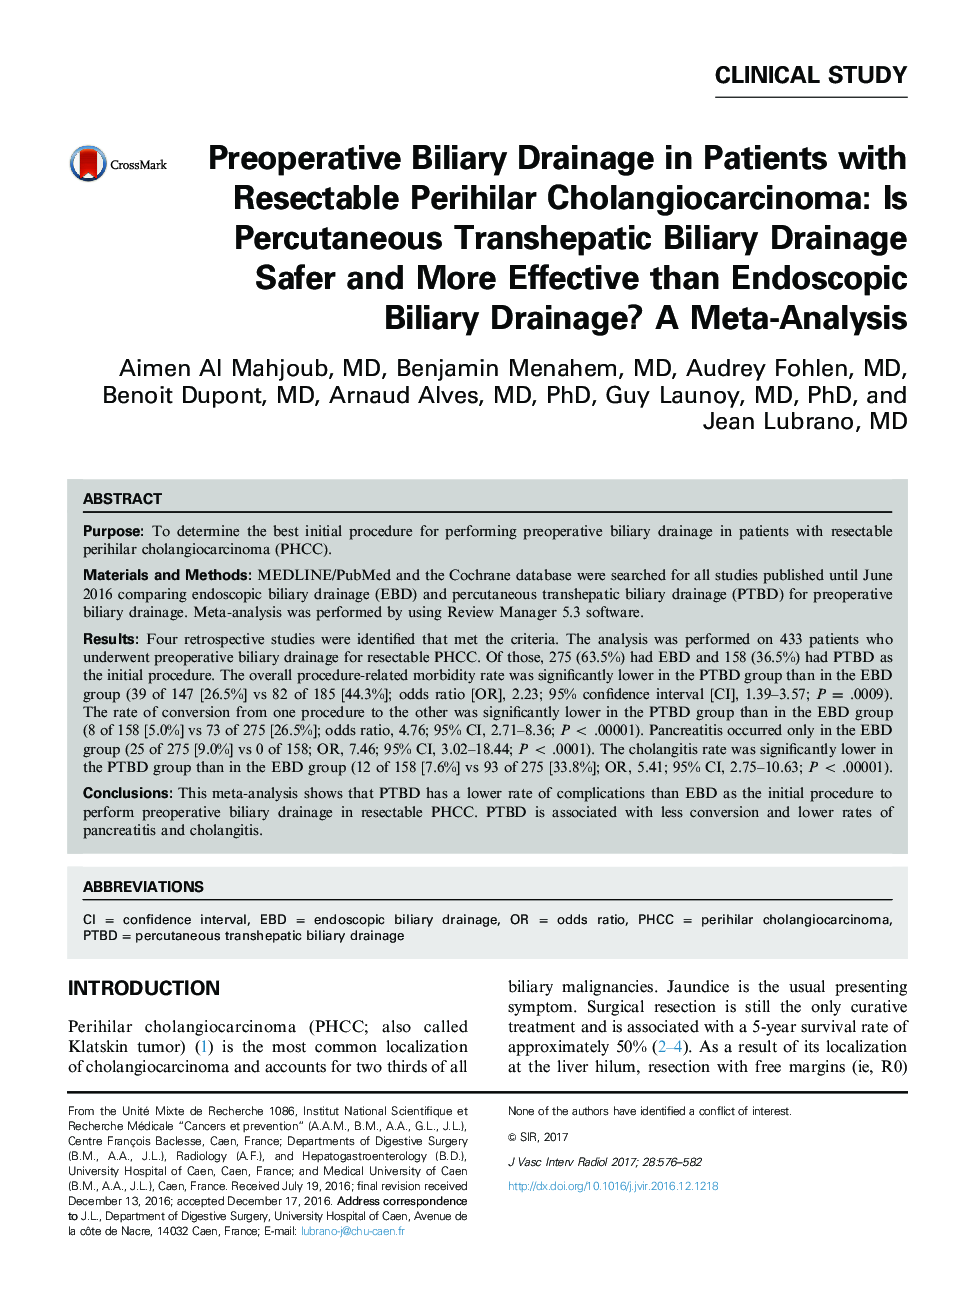 Preoperative Biliary Drainage in Patients with Resectable Perihilar Cholangiocarcinoma: Is Percutaneous Transhepatic Biliary Drainage Safer and More Effective than Endoscopic Biliary Drainage? A Meta-Analysis